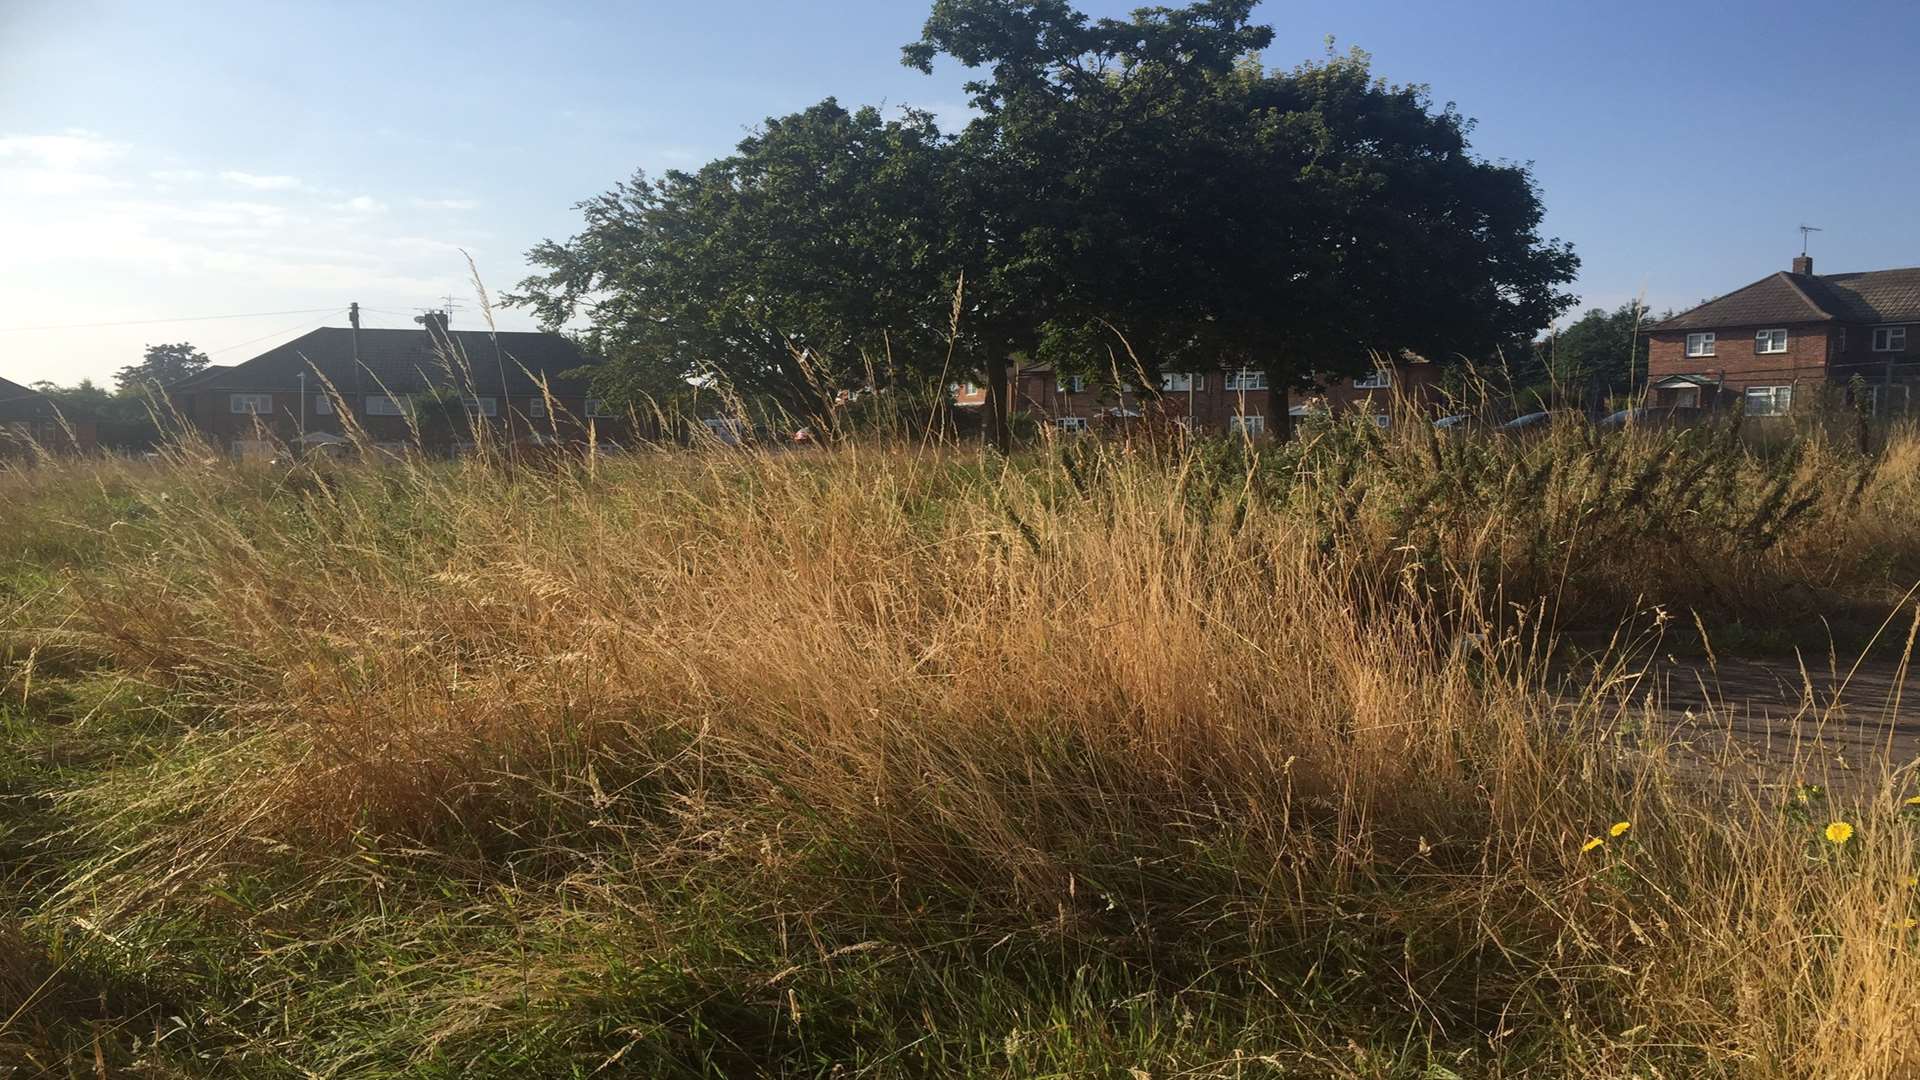 The overgrown grass area in Freemens Way in Deal